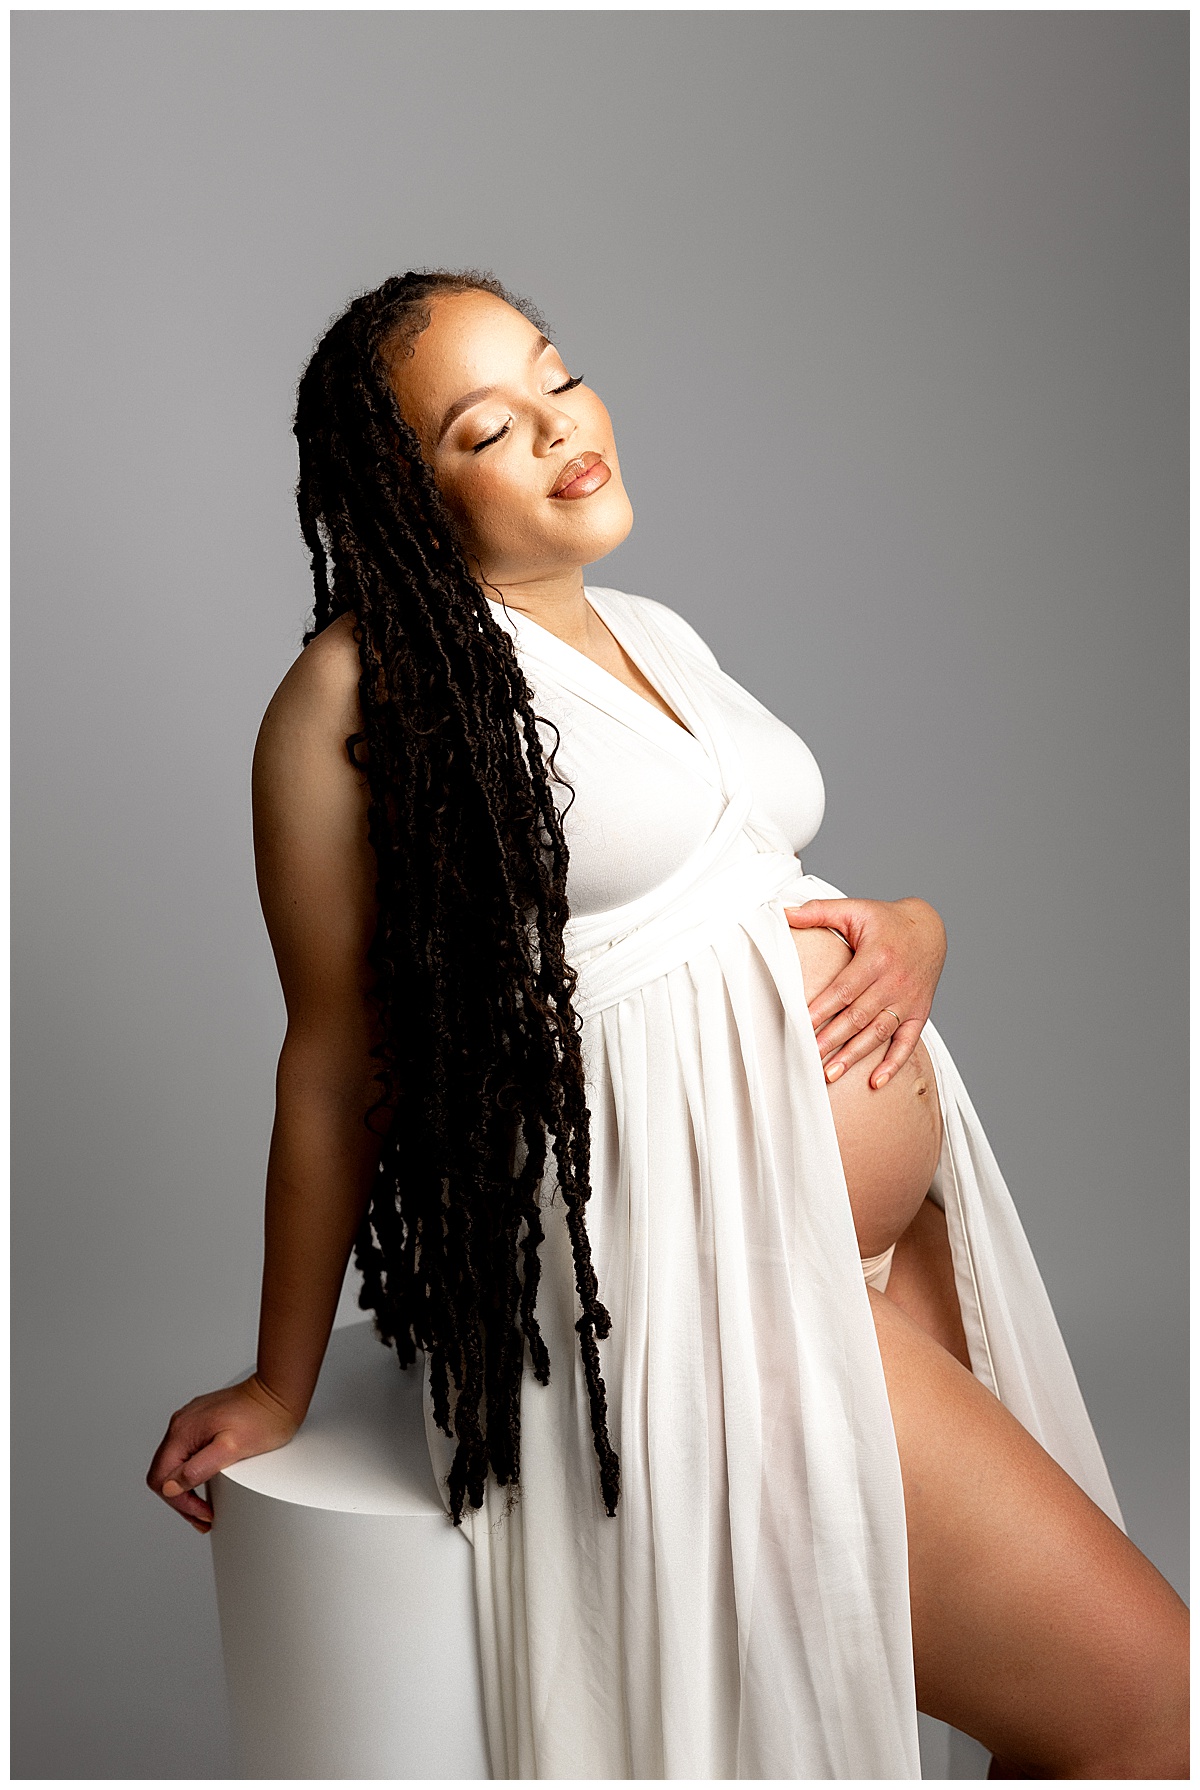 Mom holds pregnant belly for Virginia Maternity Photographer